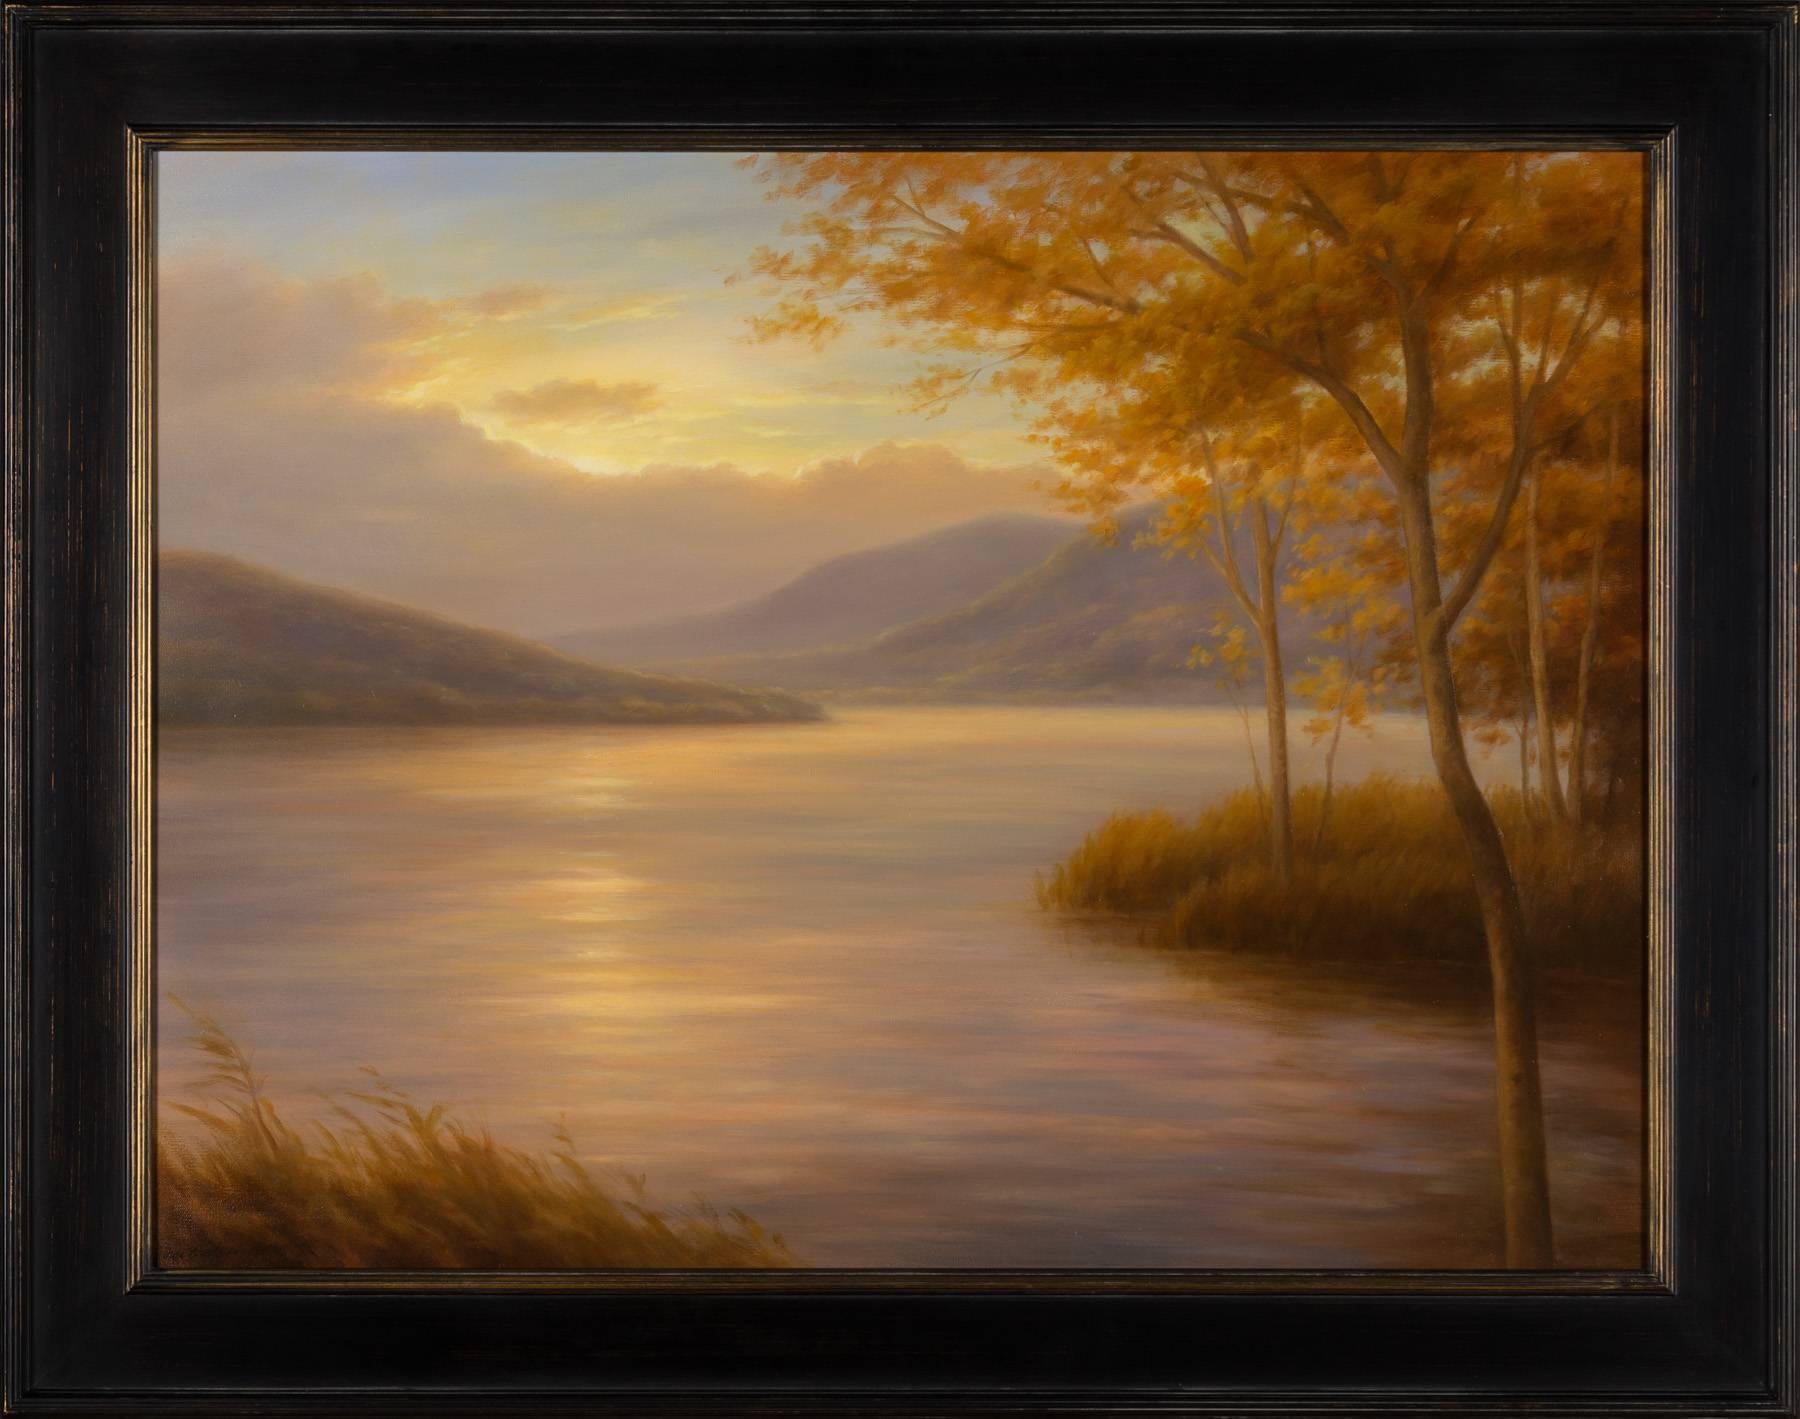 Water's Edge- Sunset - Painting by Jane Bloodgood-Abrams